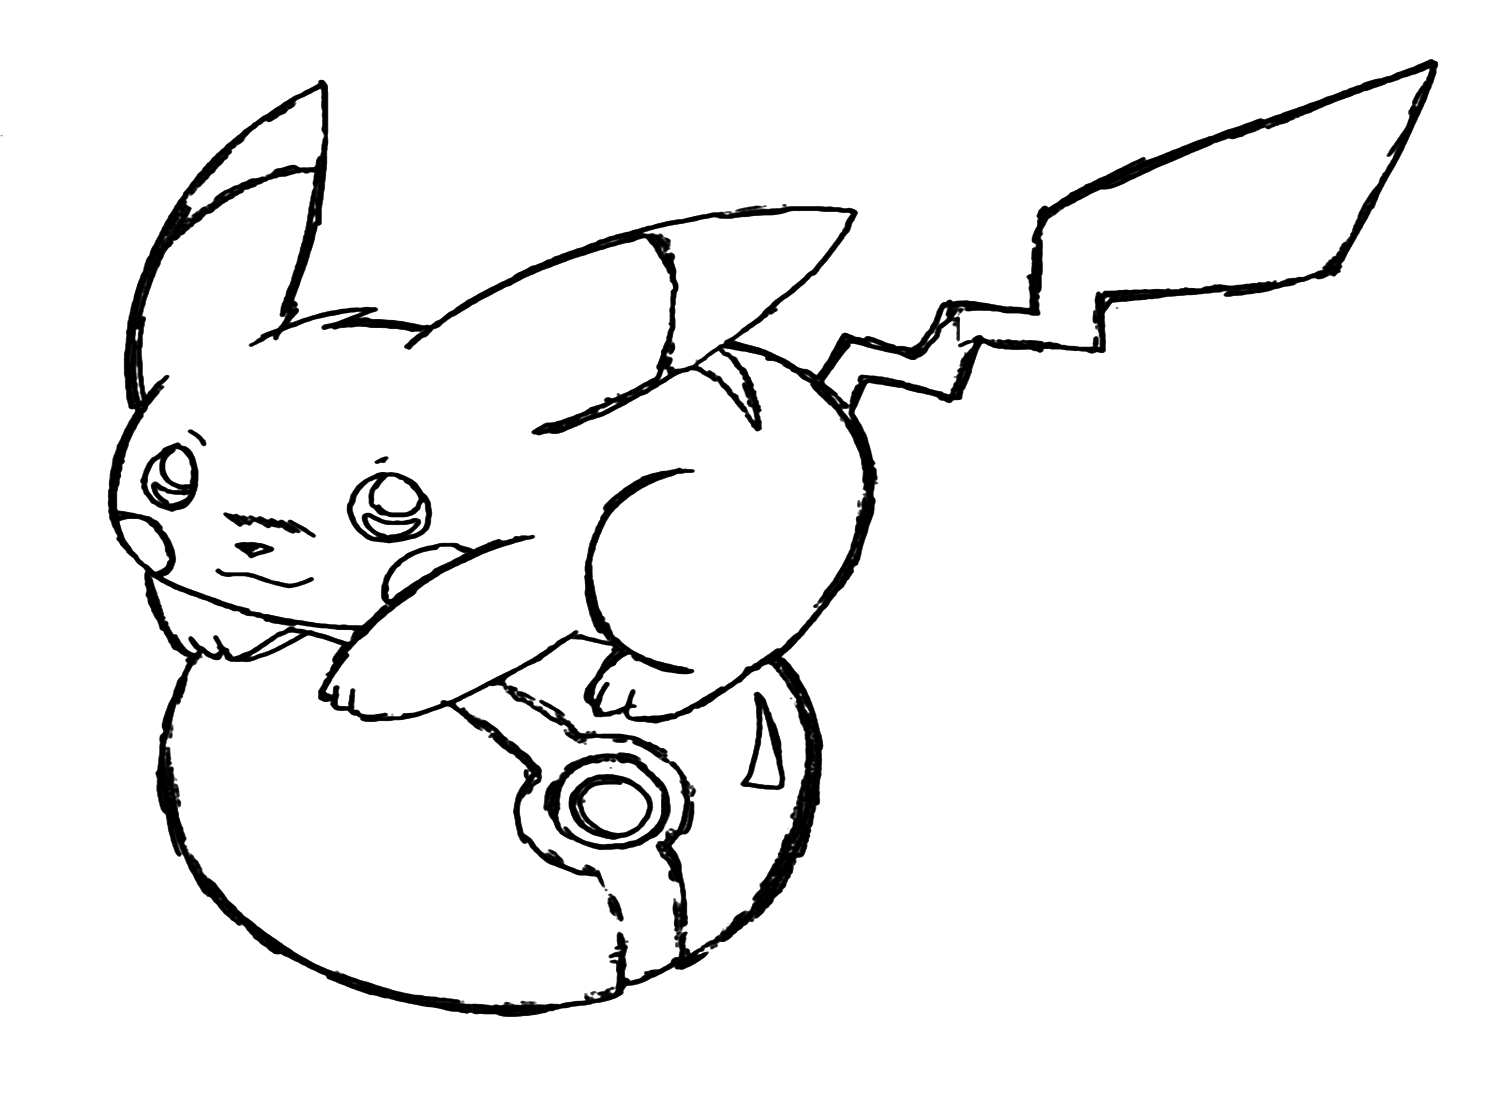 Cute Pokemon Pikachu Coloring Pages